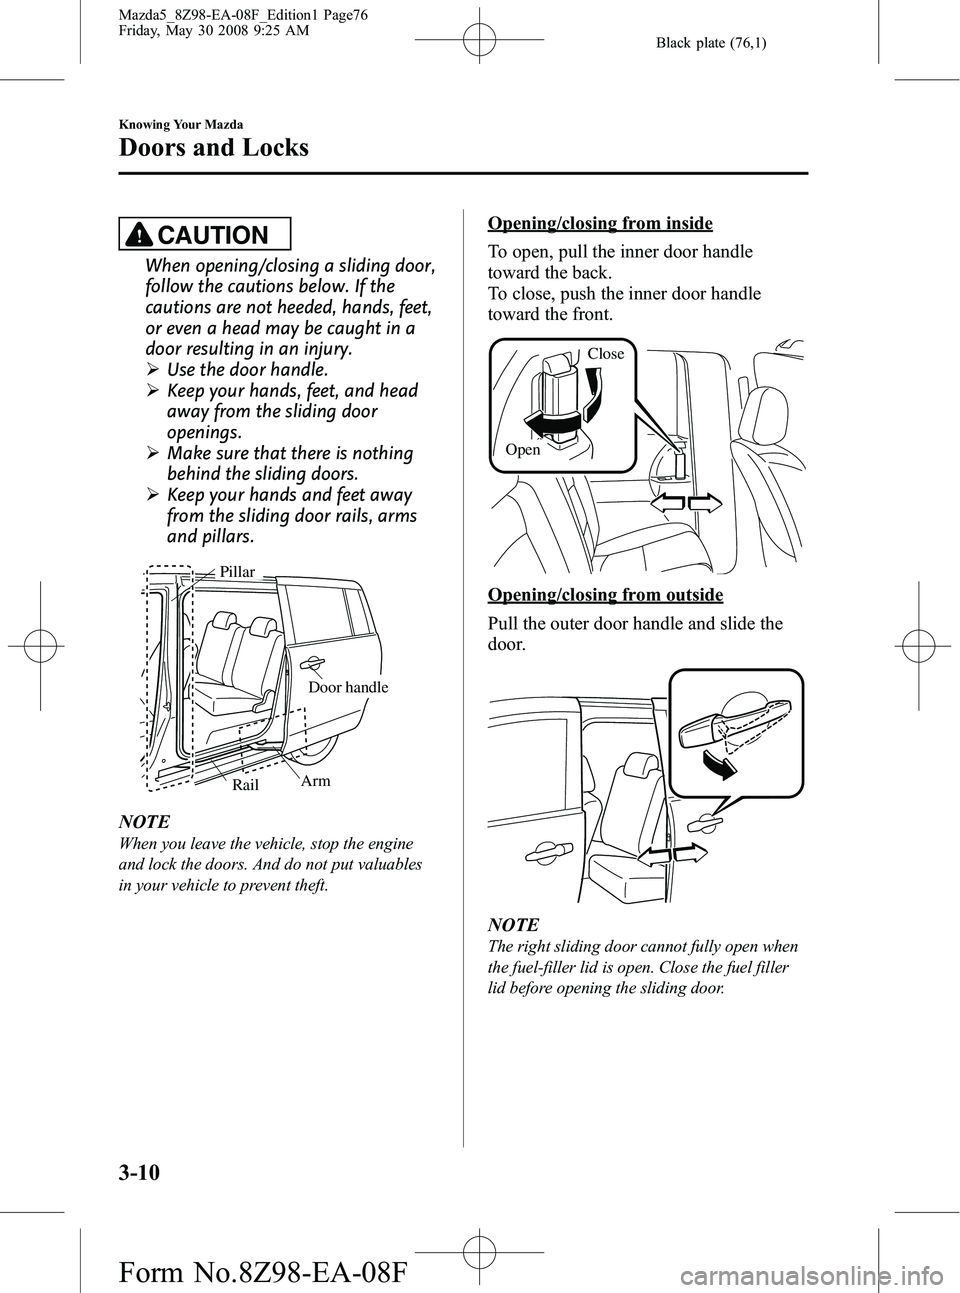 MAZDA MODEL 5 2009  Owners Manual Black plate (76,1)
CAUTION
When opening/closing a sliding door,
follow the cautions below. If the
cautions are not heeded, hands, feet,
or even a head may be caught in a
door resulting in an injury.
�